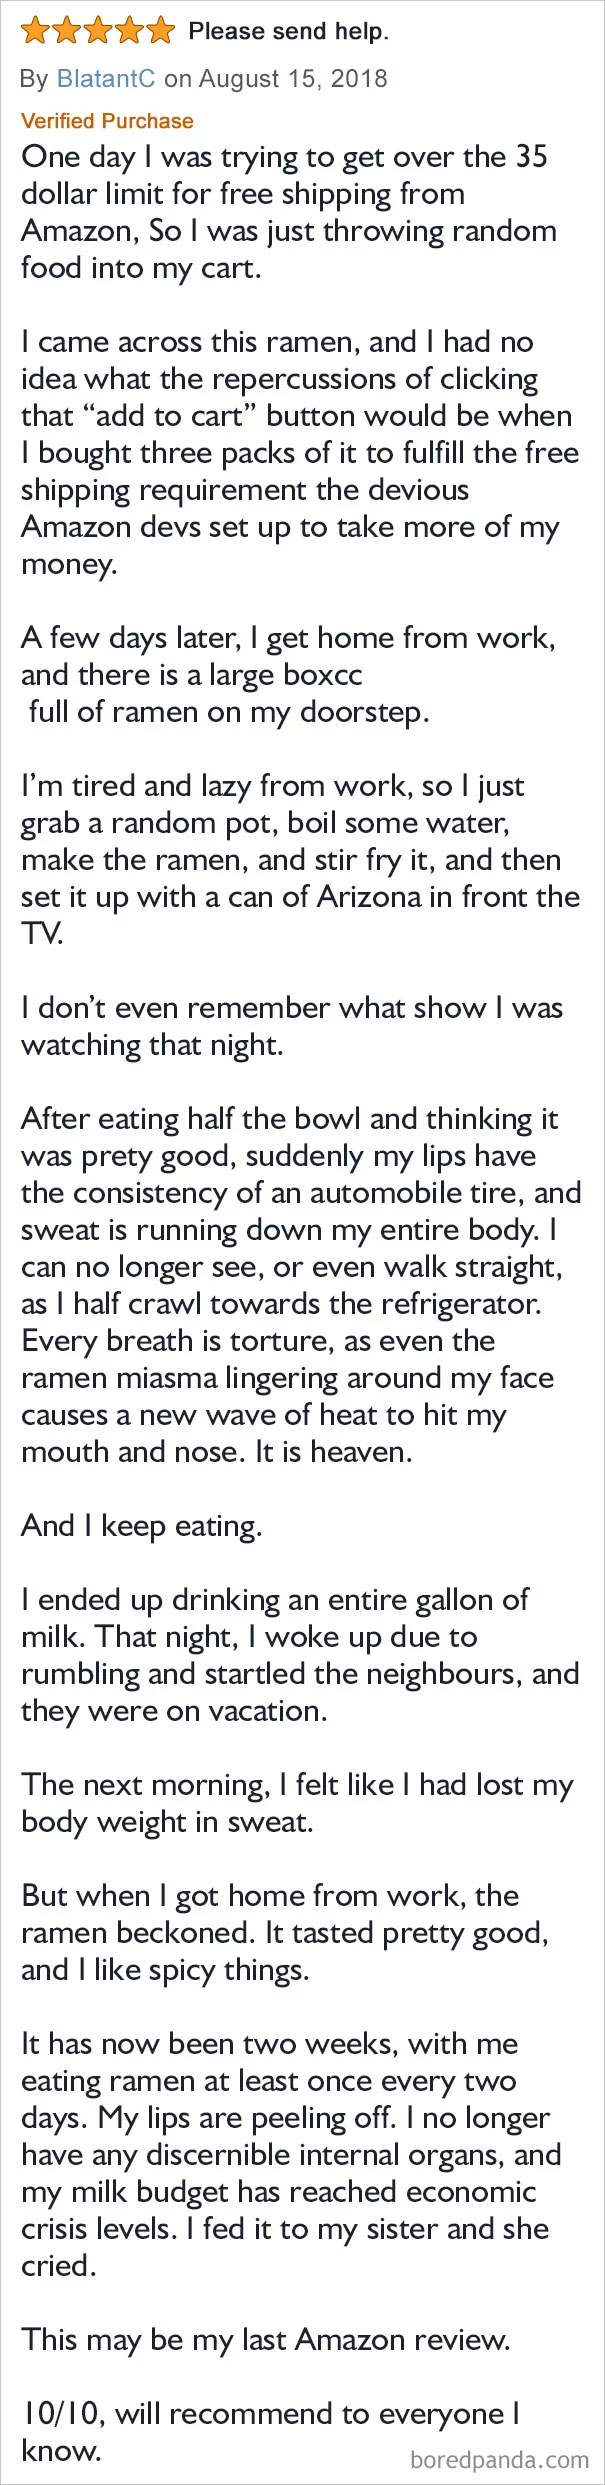 A Review Of Those Incredibly Spicy Noodles